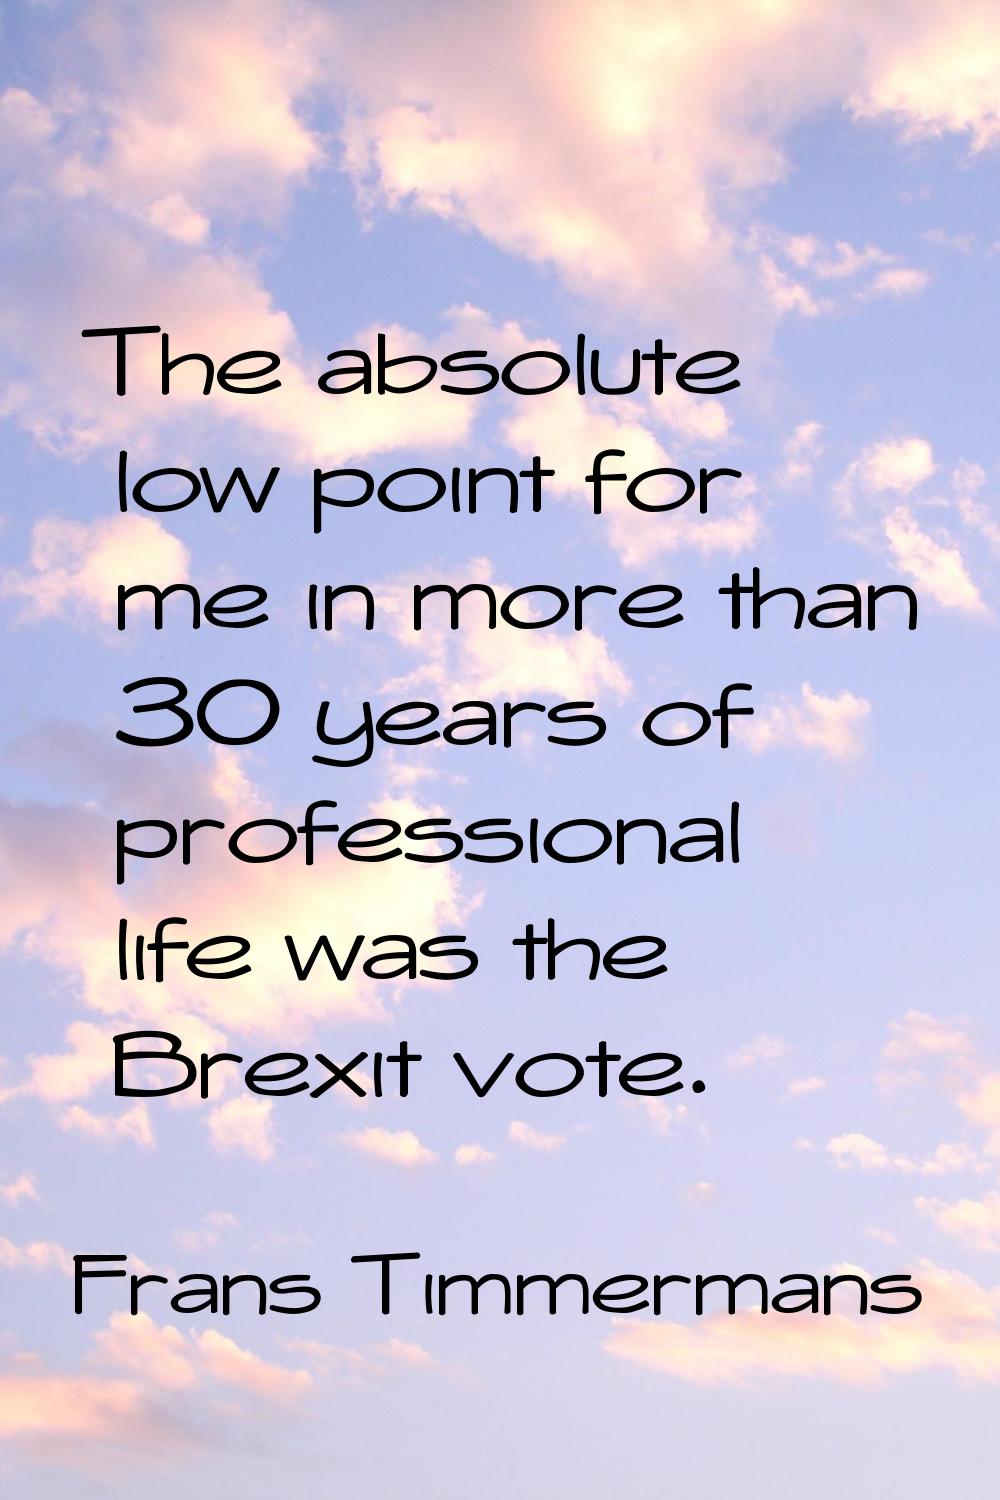 The absolute low point for me in more than 30 years of professional life was the Brexit vote.